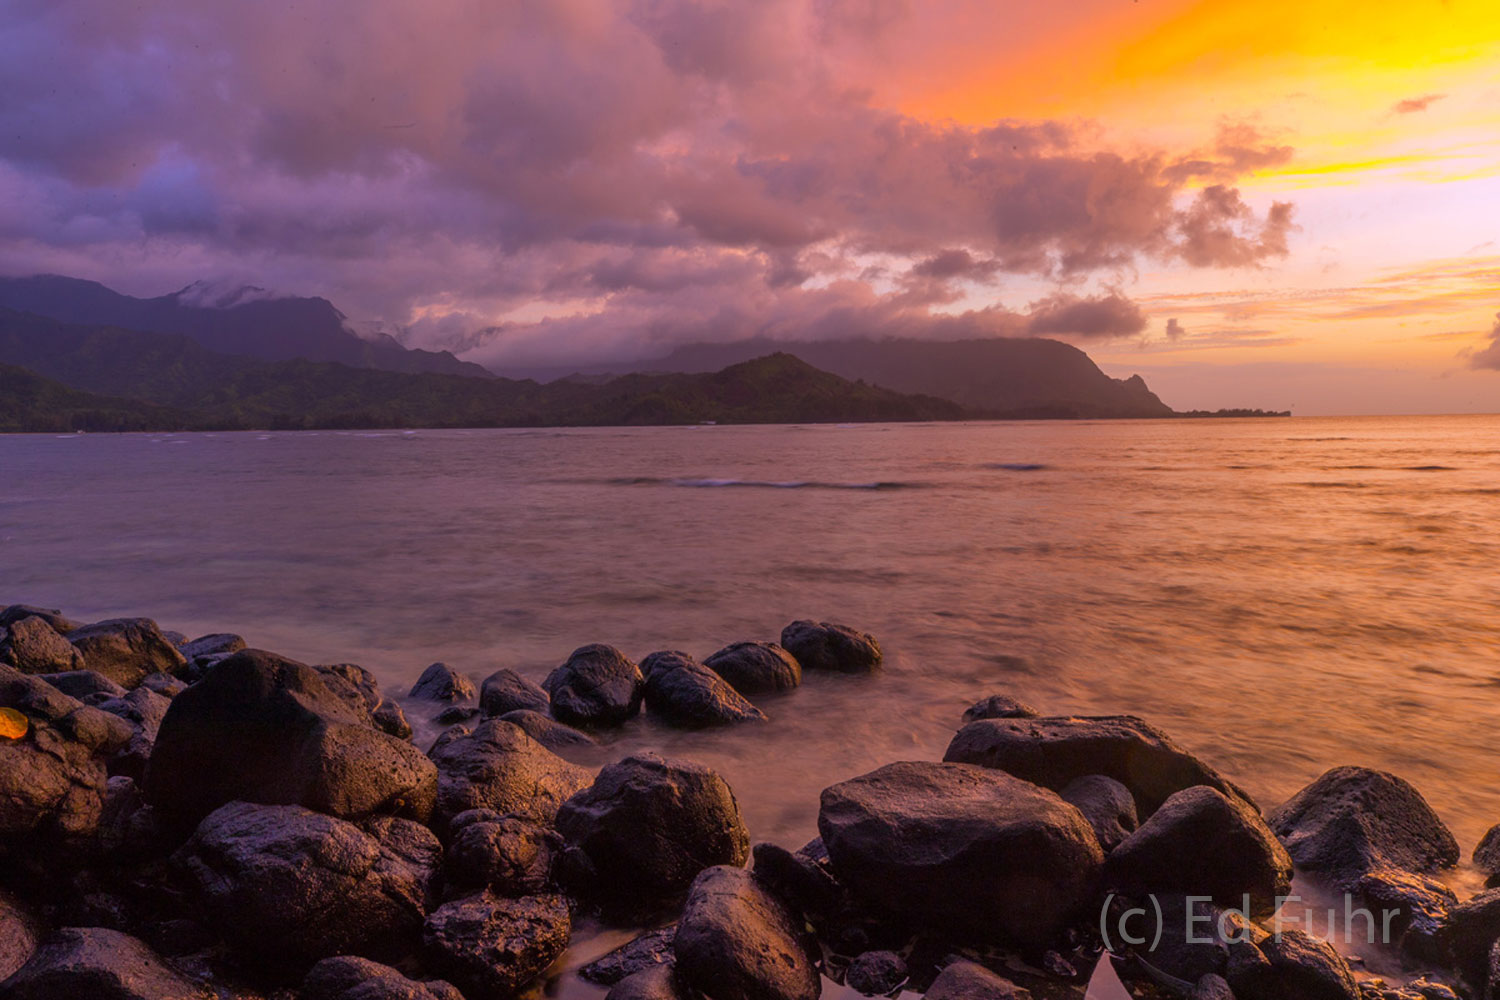 Sharp lava rocks contrast with the warm hues of sunset reflecting in Honalei Bay.